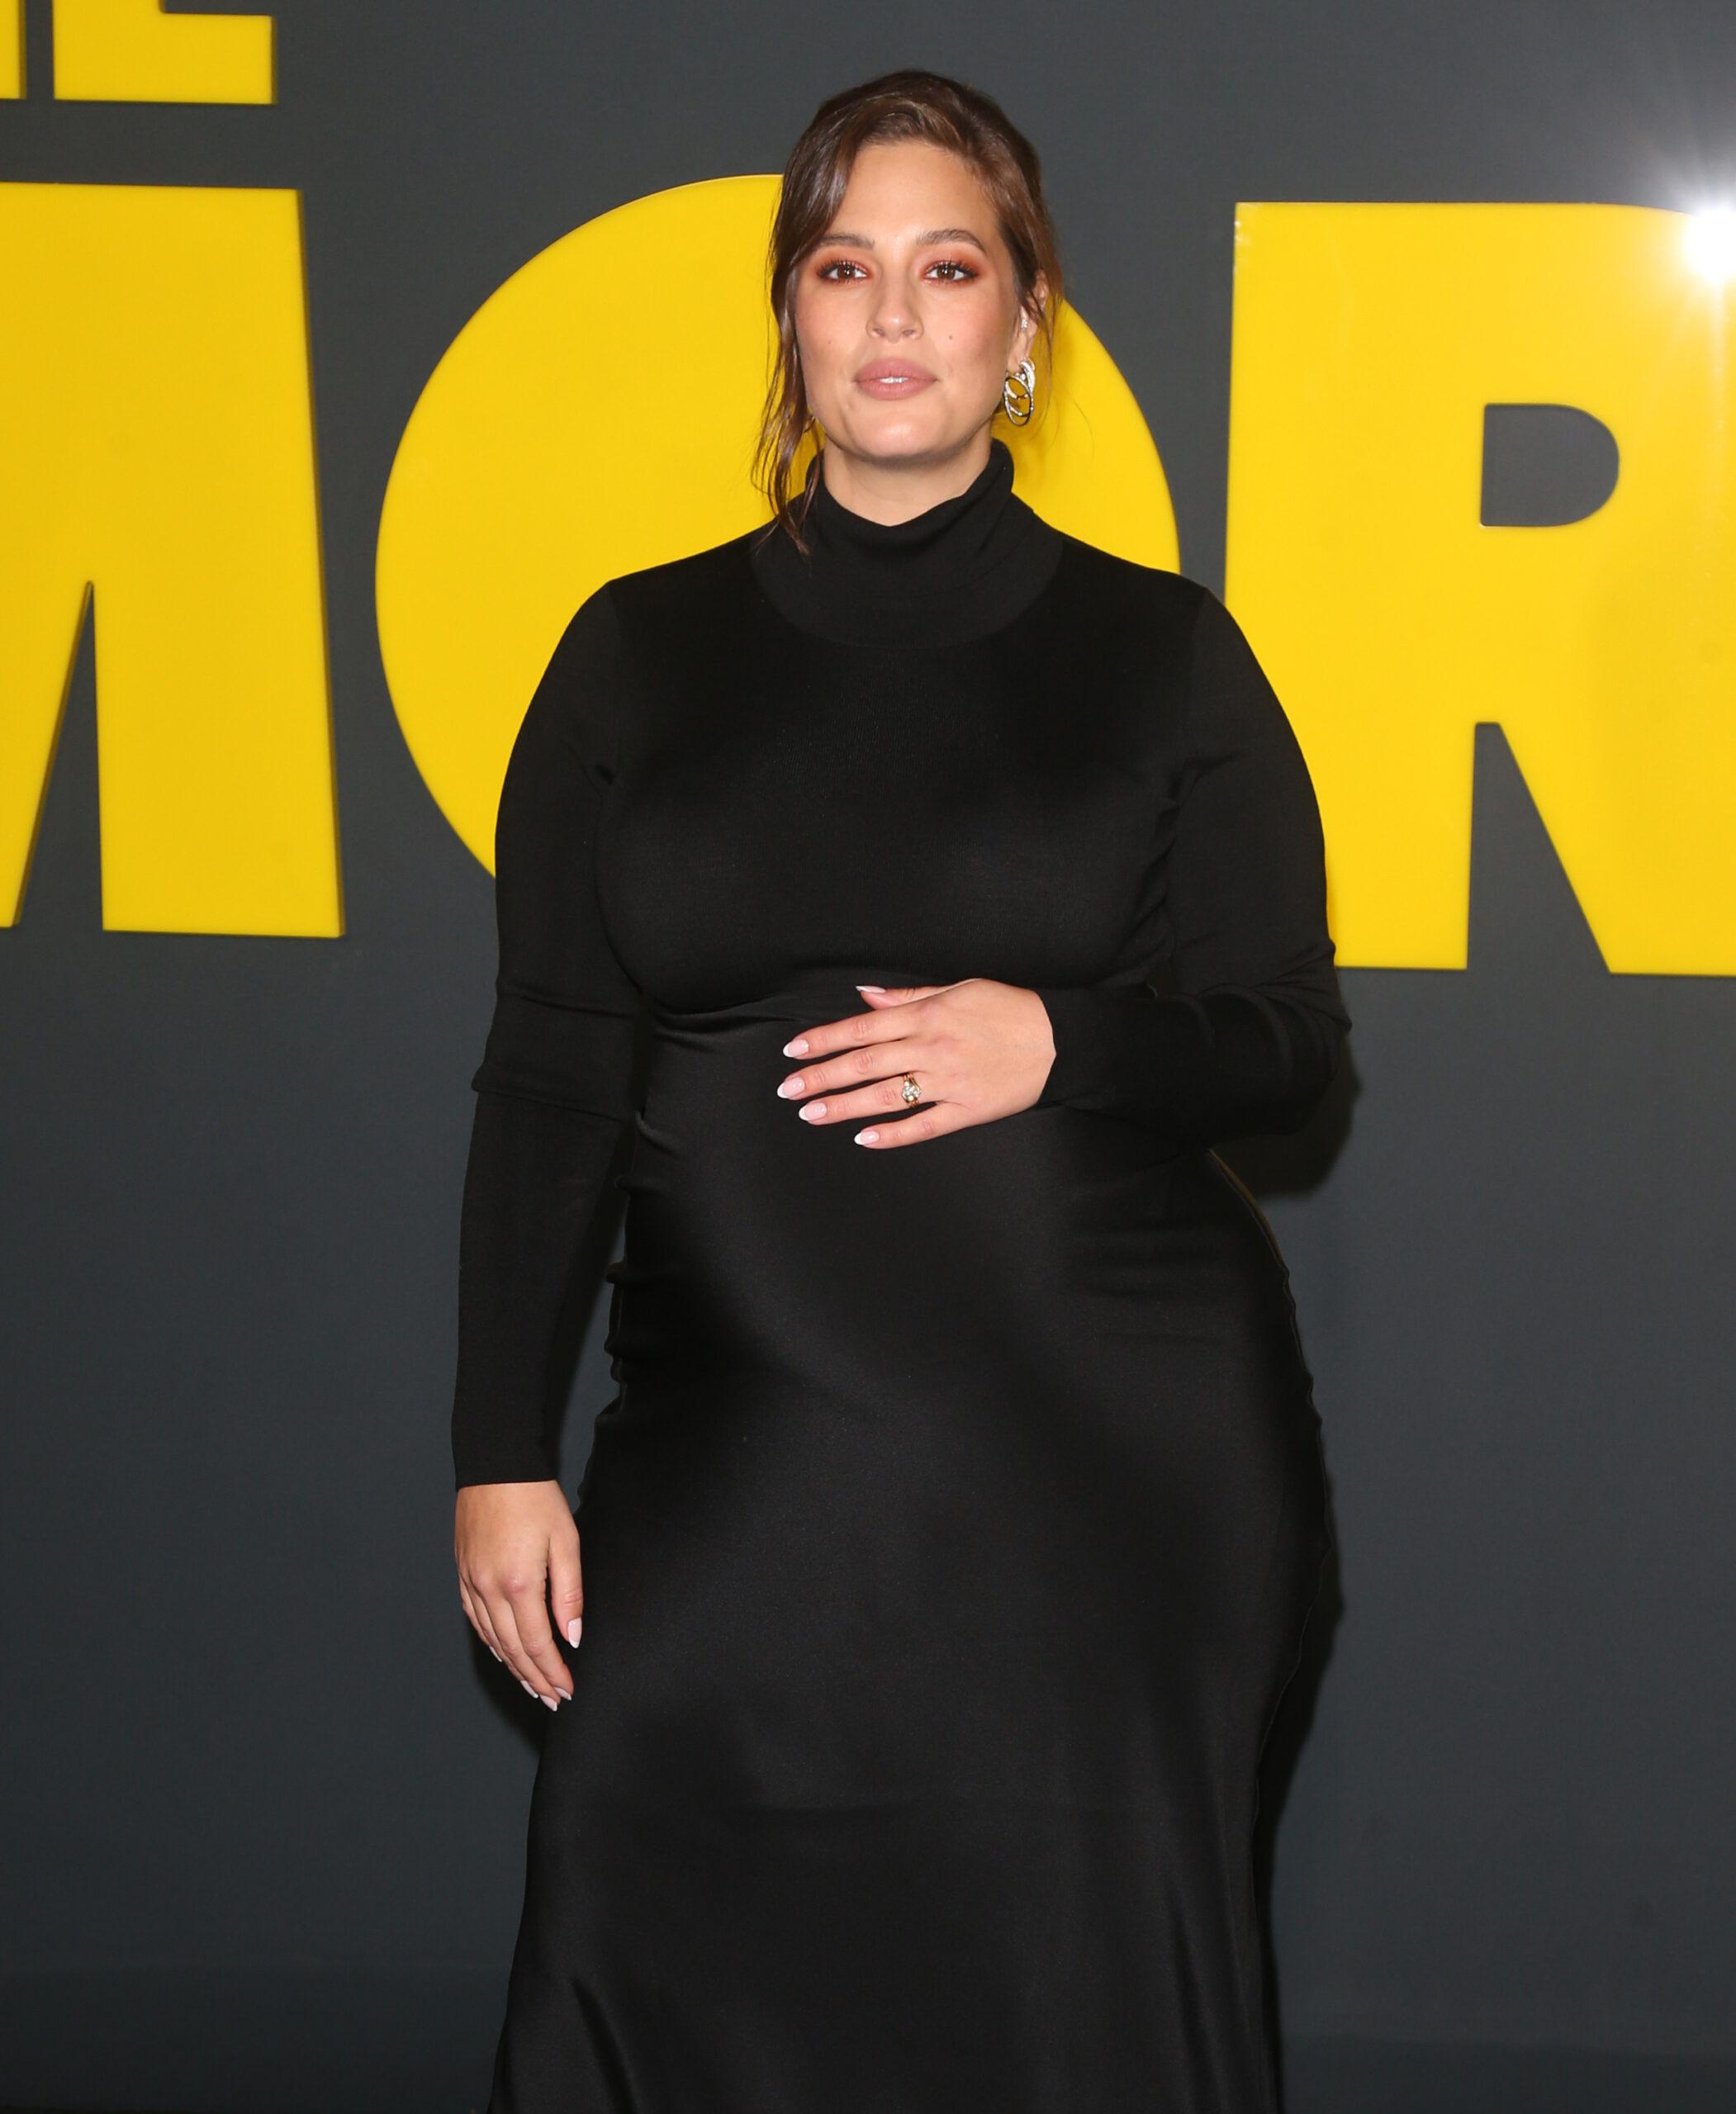 Ashley Graham Talks About the Traumatic Birth of Her Twins